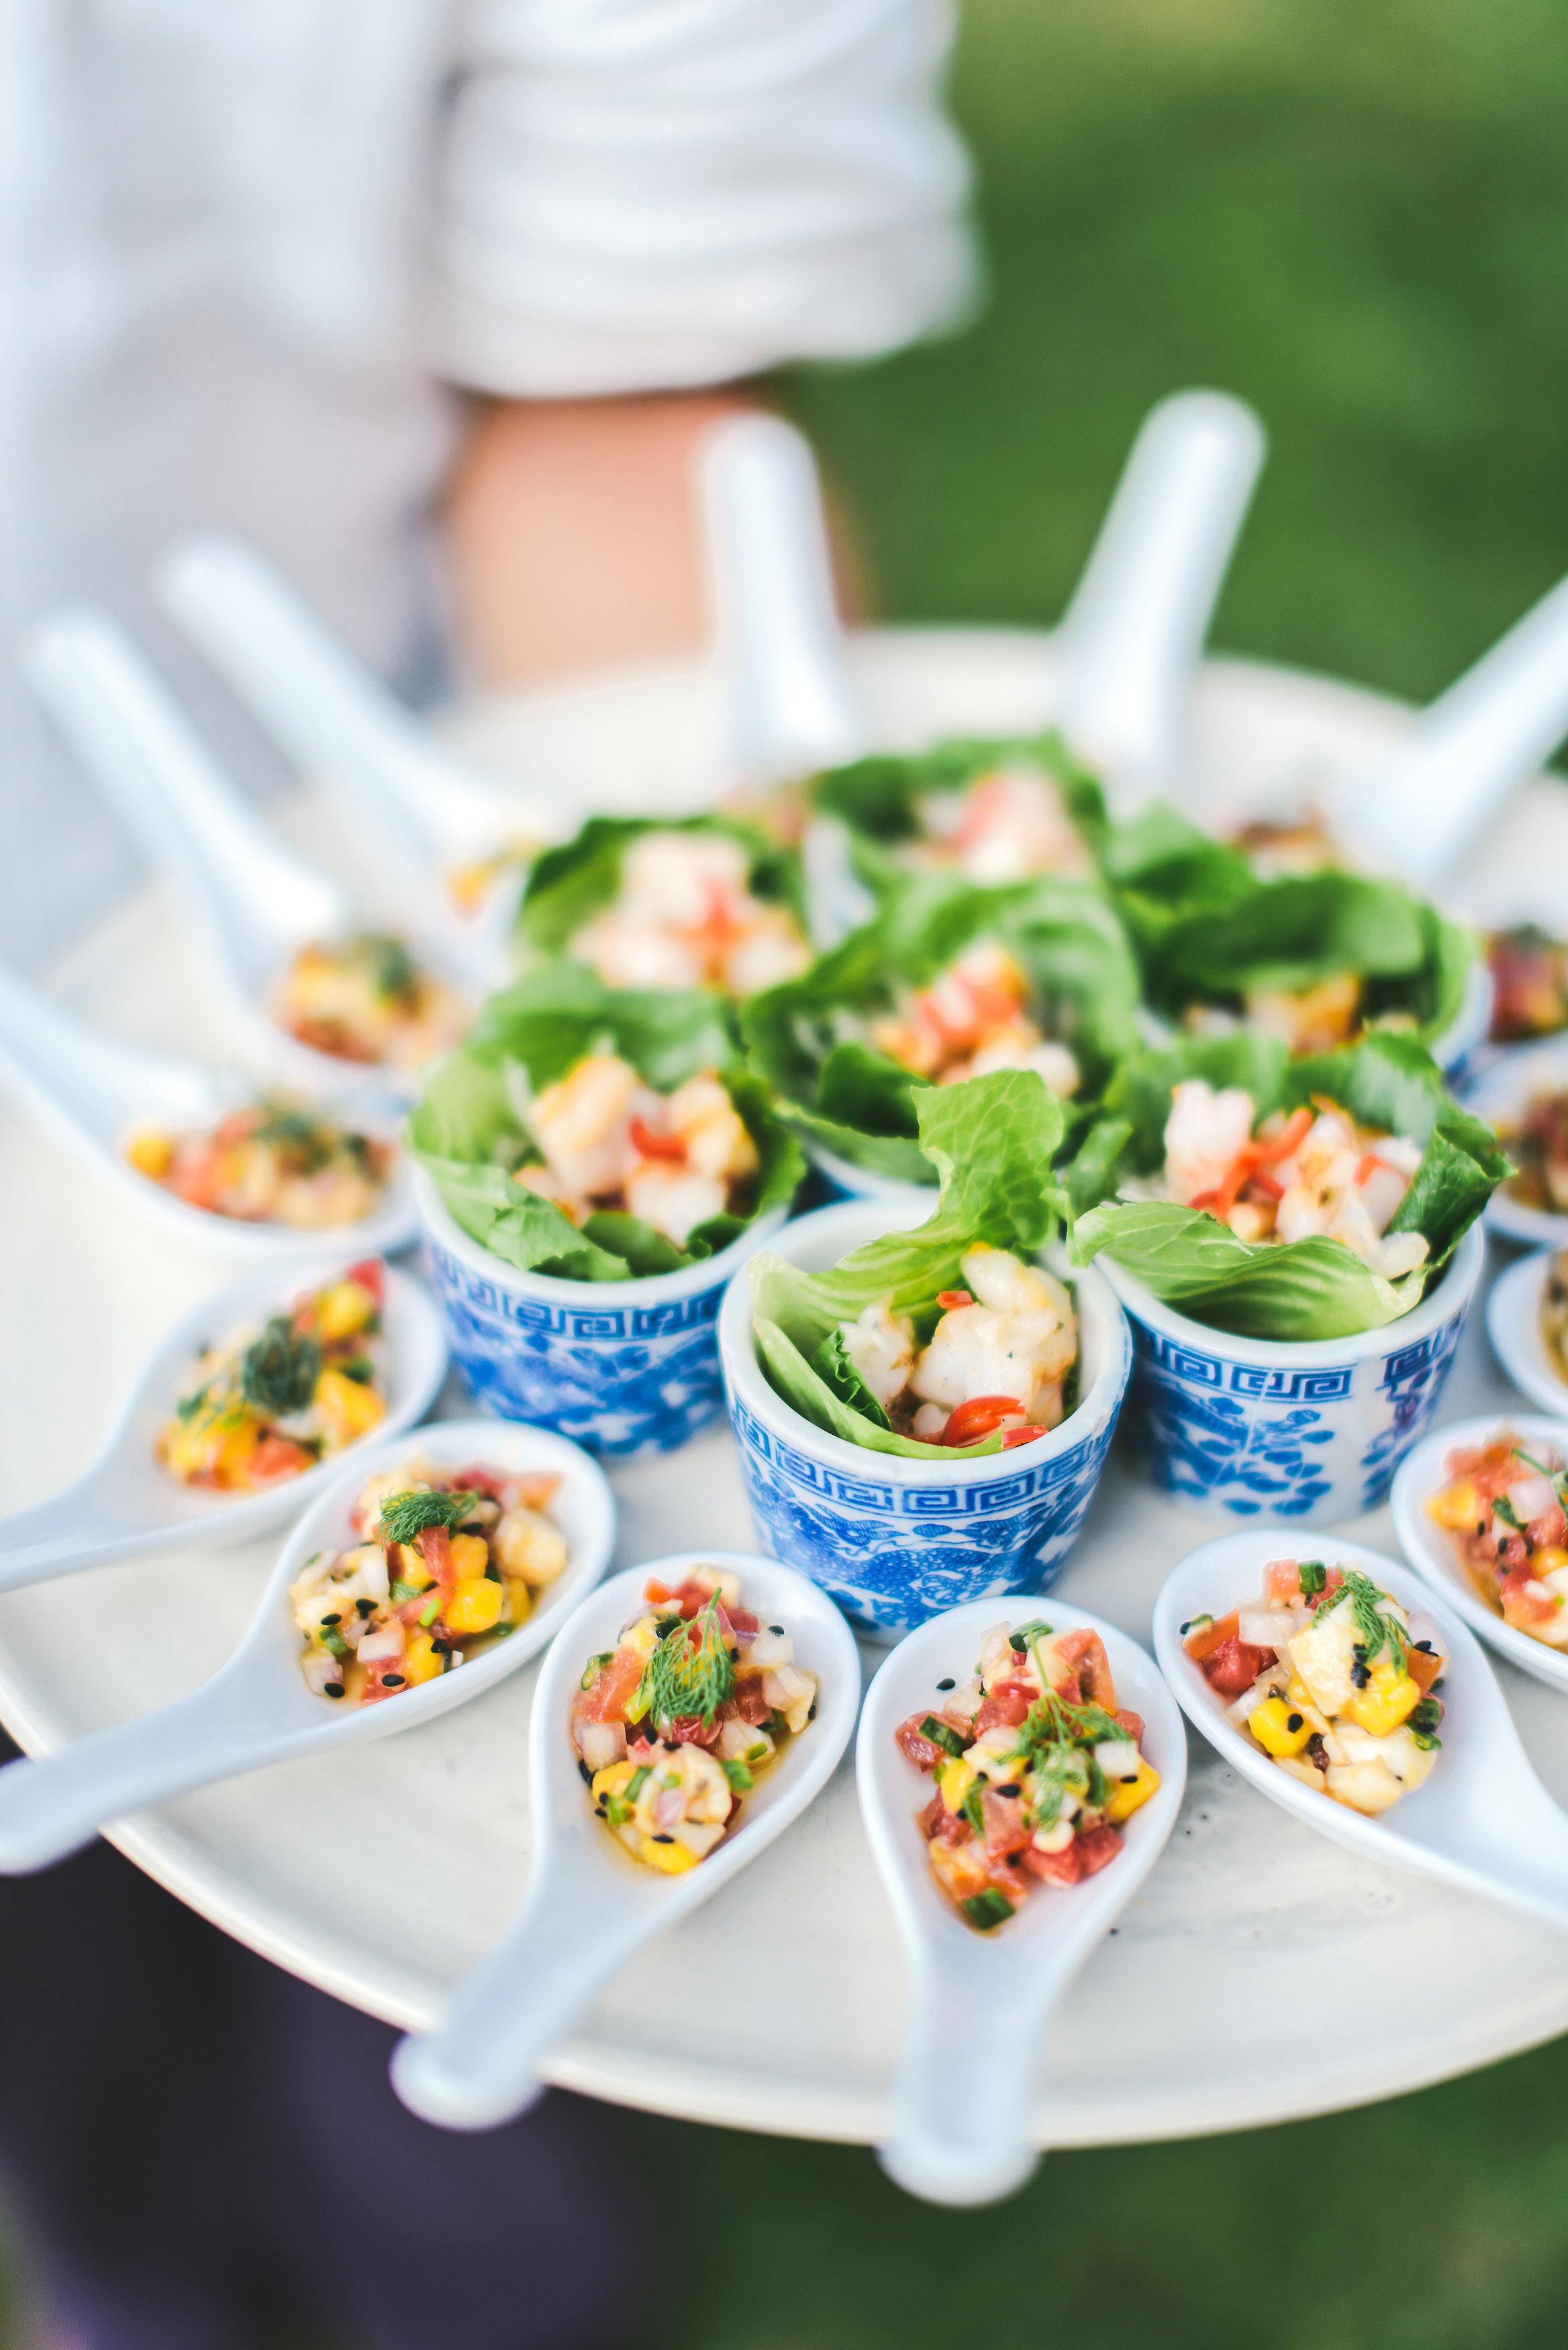 25 Unexpected Wedding Food Ideas Your Guests Will Love Martha Stewart